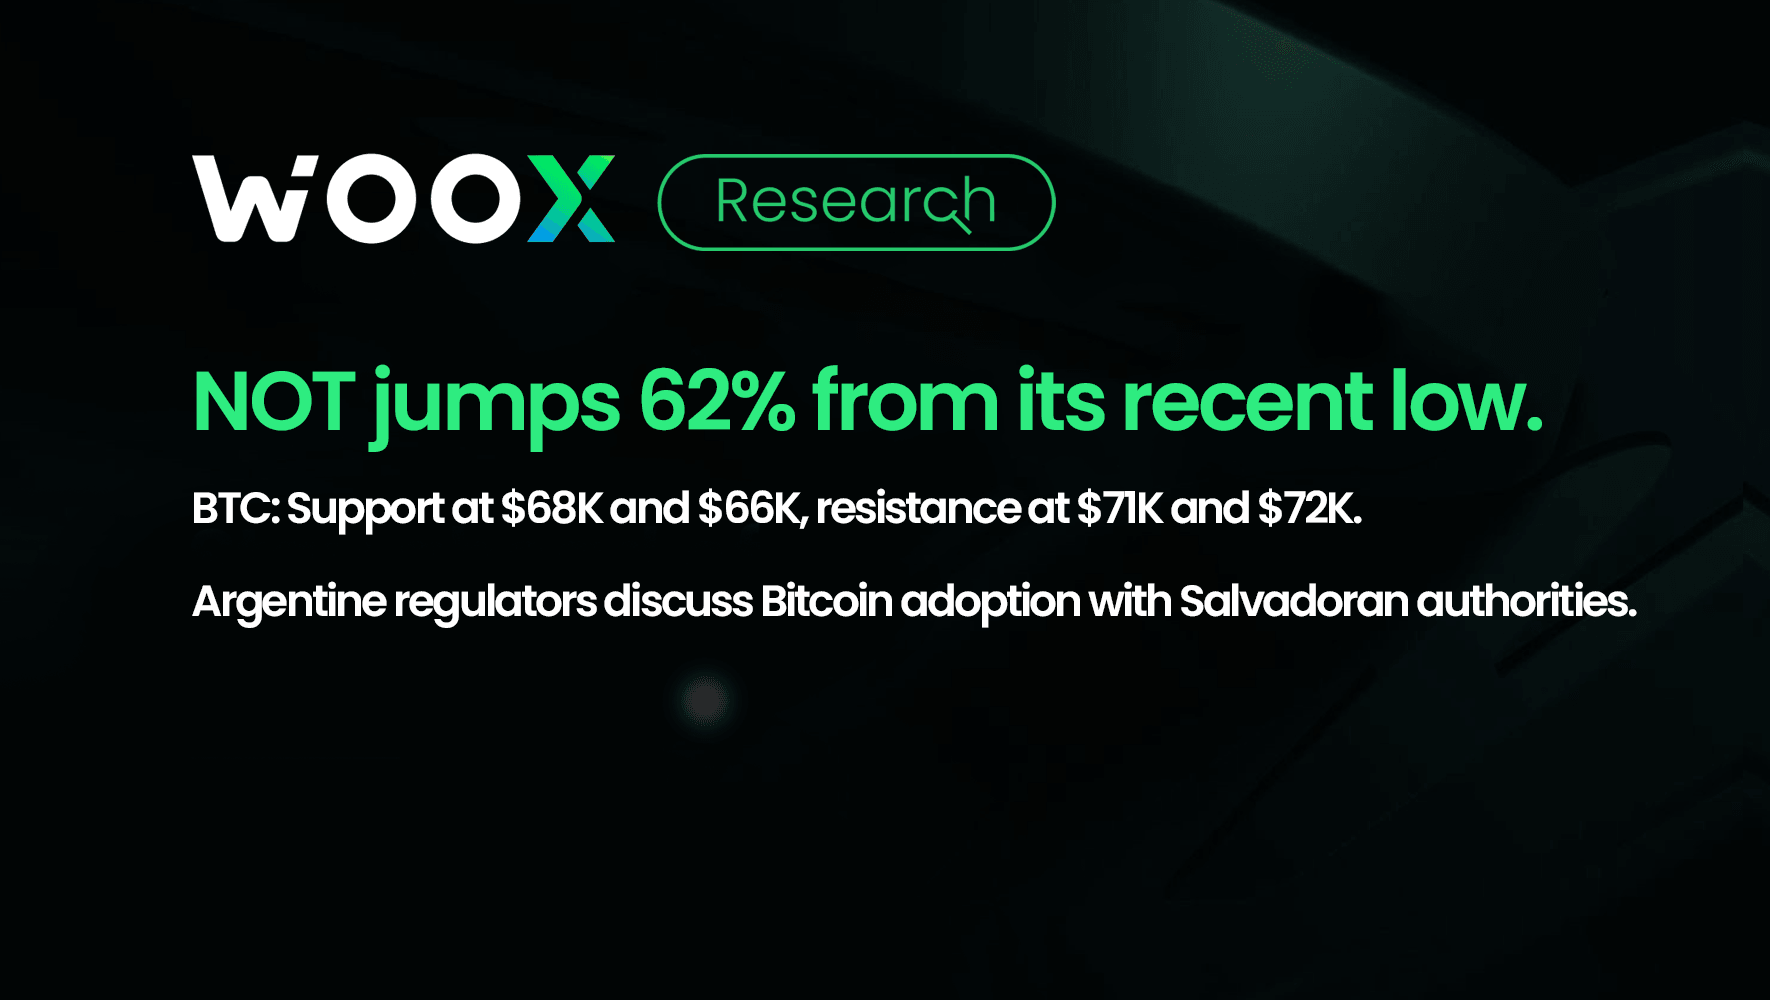 NOT jumps 62% from recent low